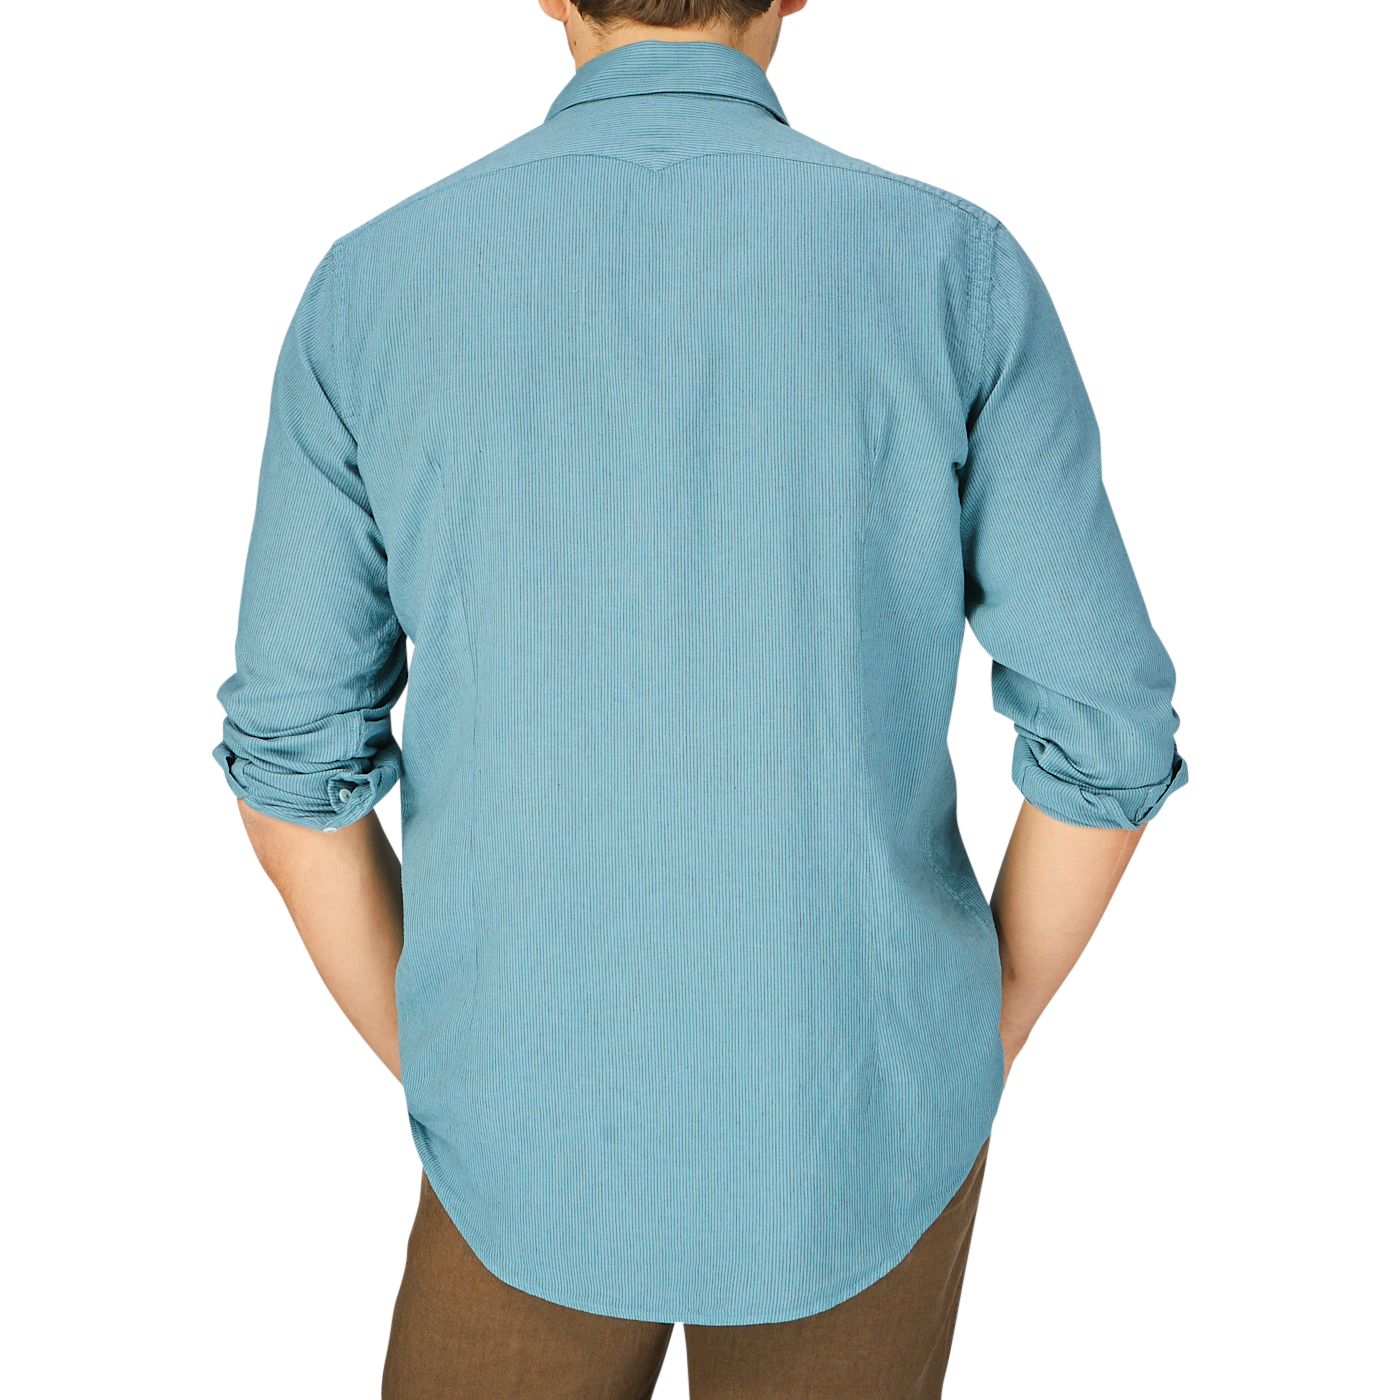 Person wearing a Turquoise Striped Cotton Linen Genova Shirt by Massimo Alba viewed from behind, made in Italy.